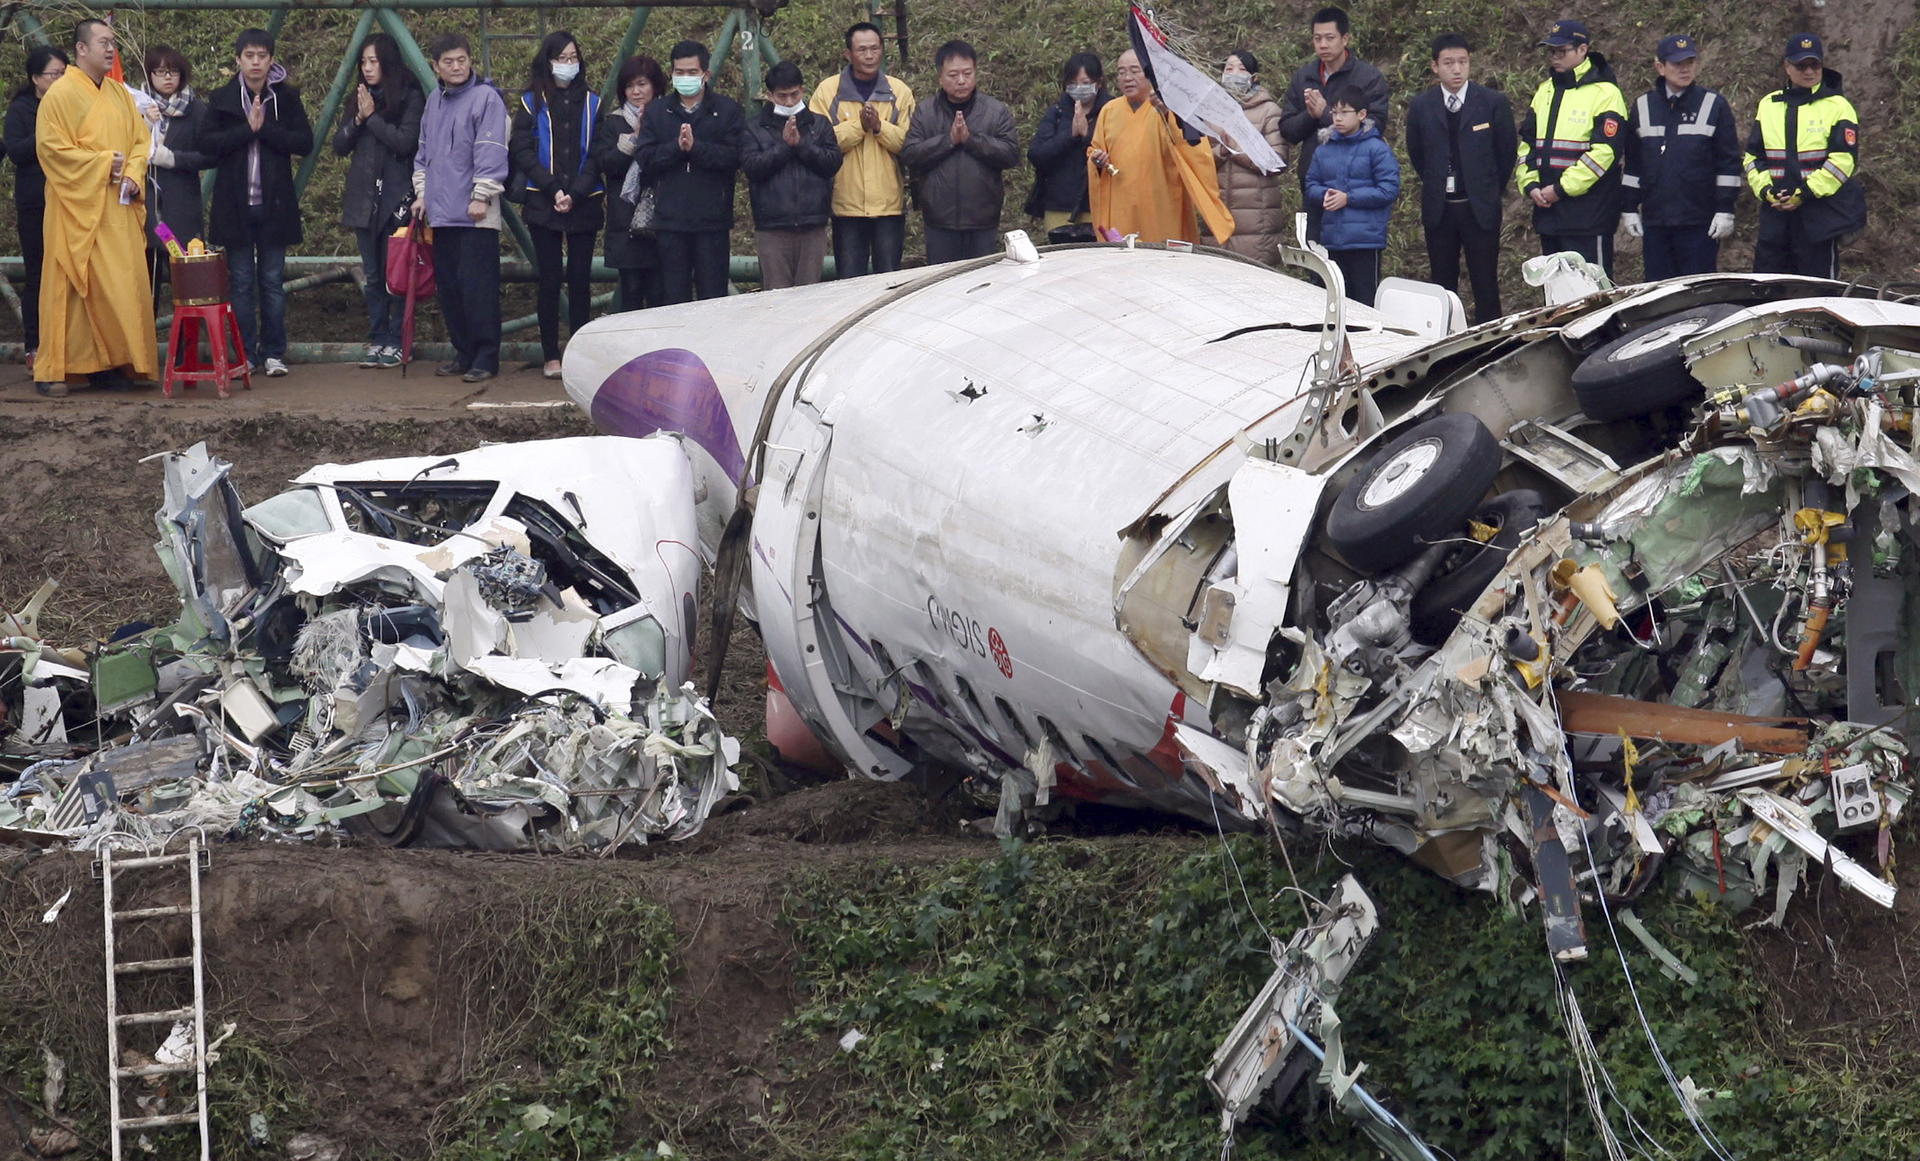 Relatives of victims of the TransAsia Airways crash pray on the banks of the Keelung River near the plane's wreckage yesterday. Photo: AP